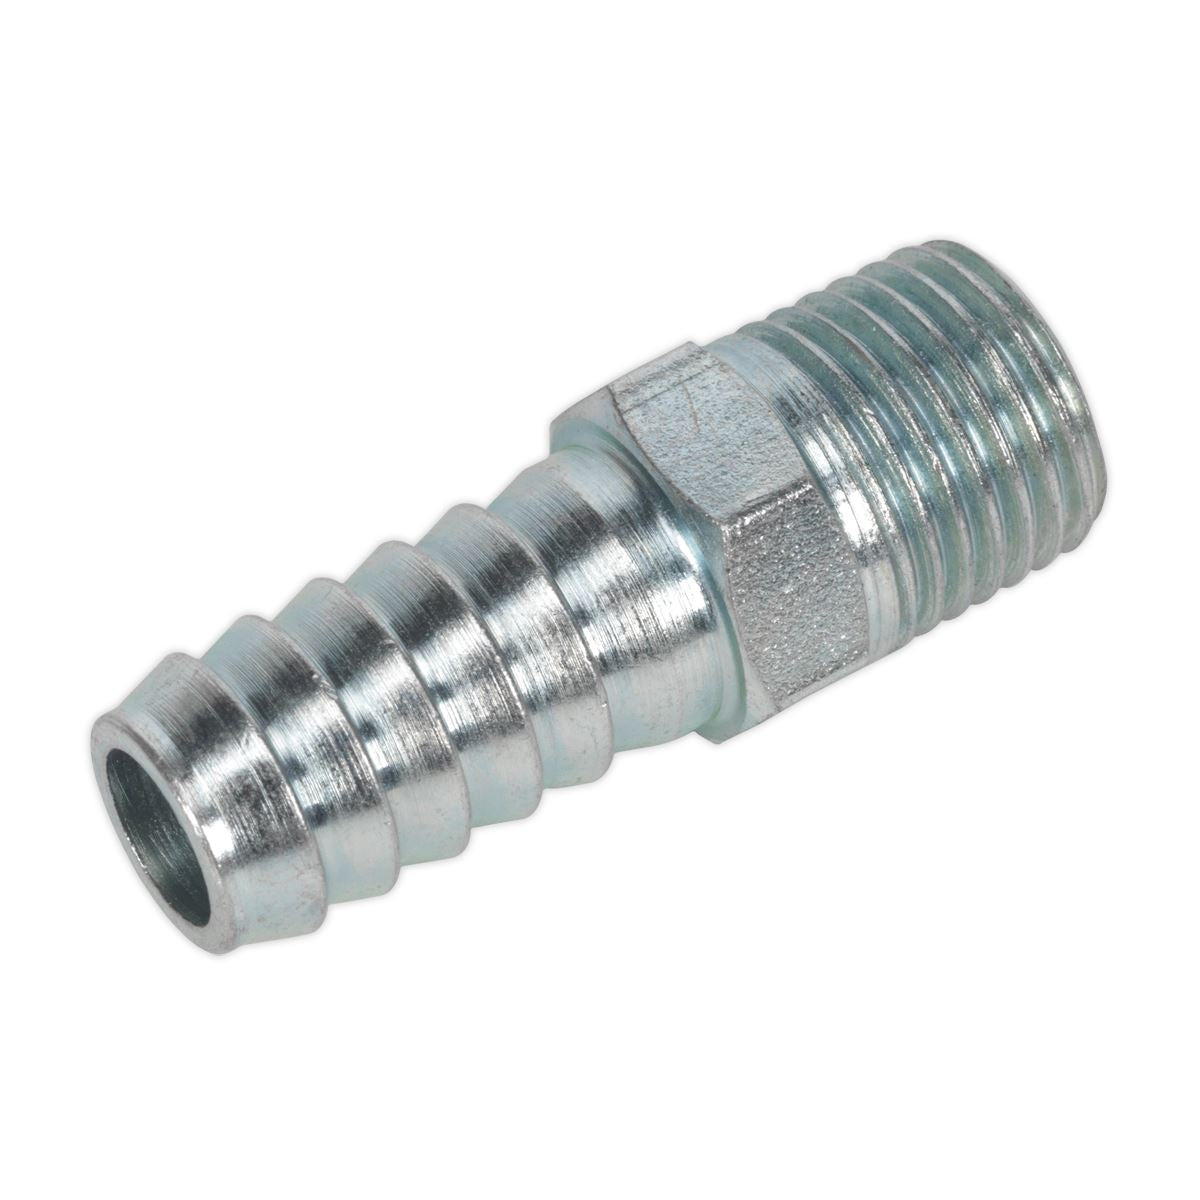 PCL Screwed Tailpiece Male 1/4"BSPT - 3/8" Hose Pack of 5